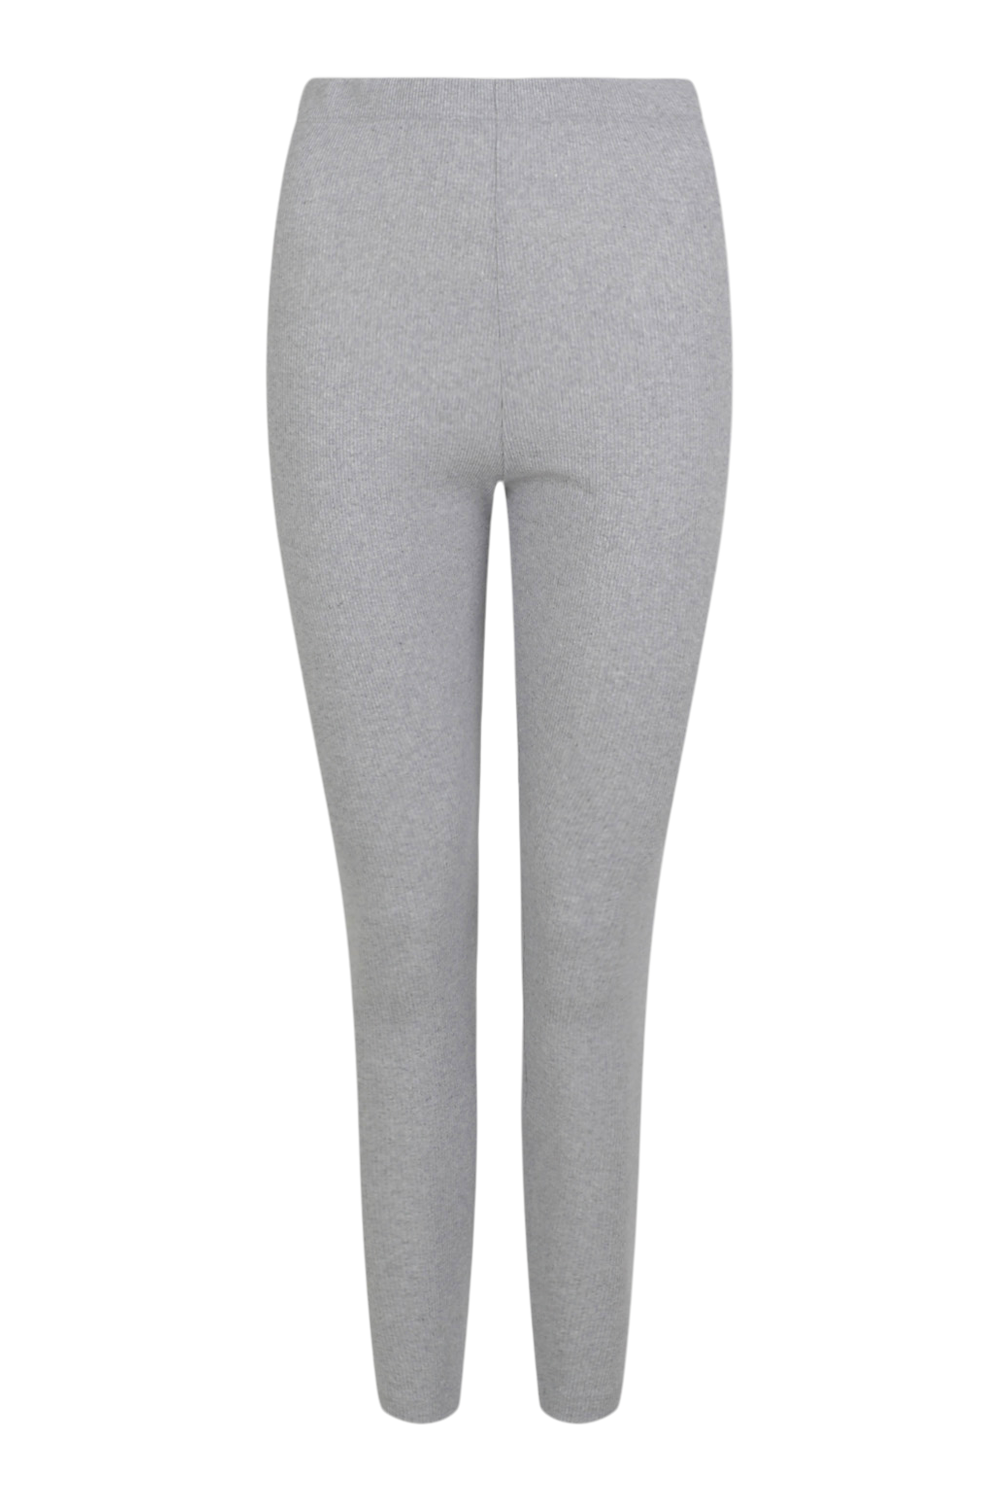 Cotton Jersey Knit High Waisted Leggings